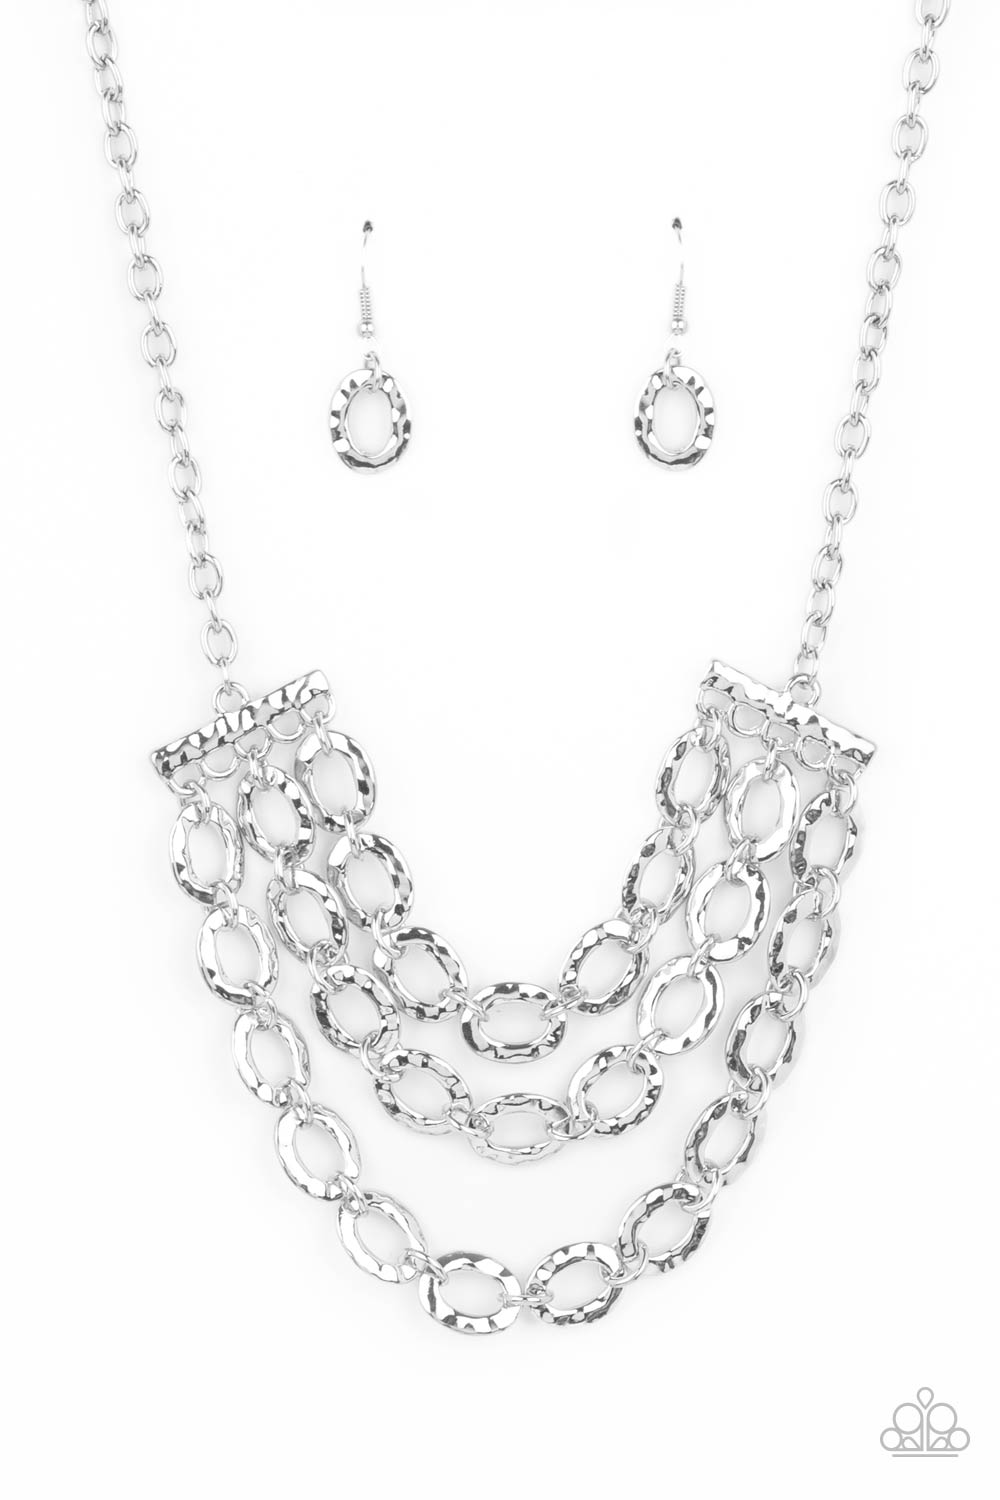 Repeat After Me - Silver Paparazzi Jewelry-1265